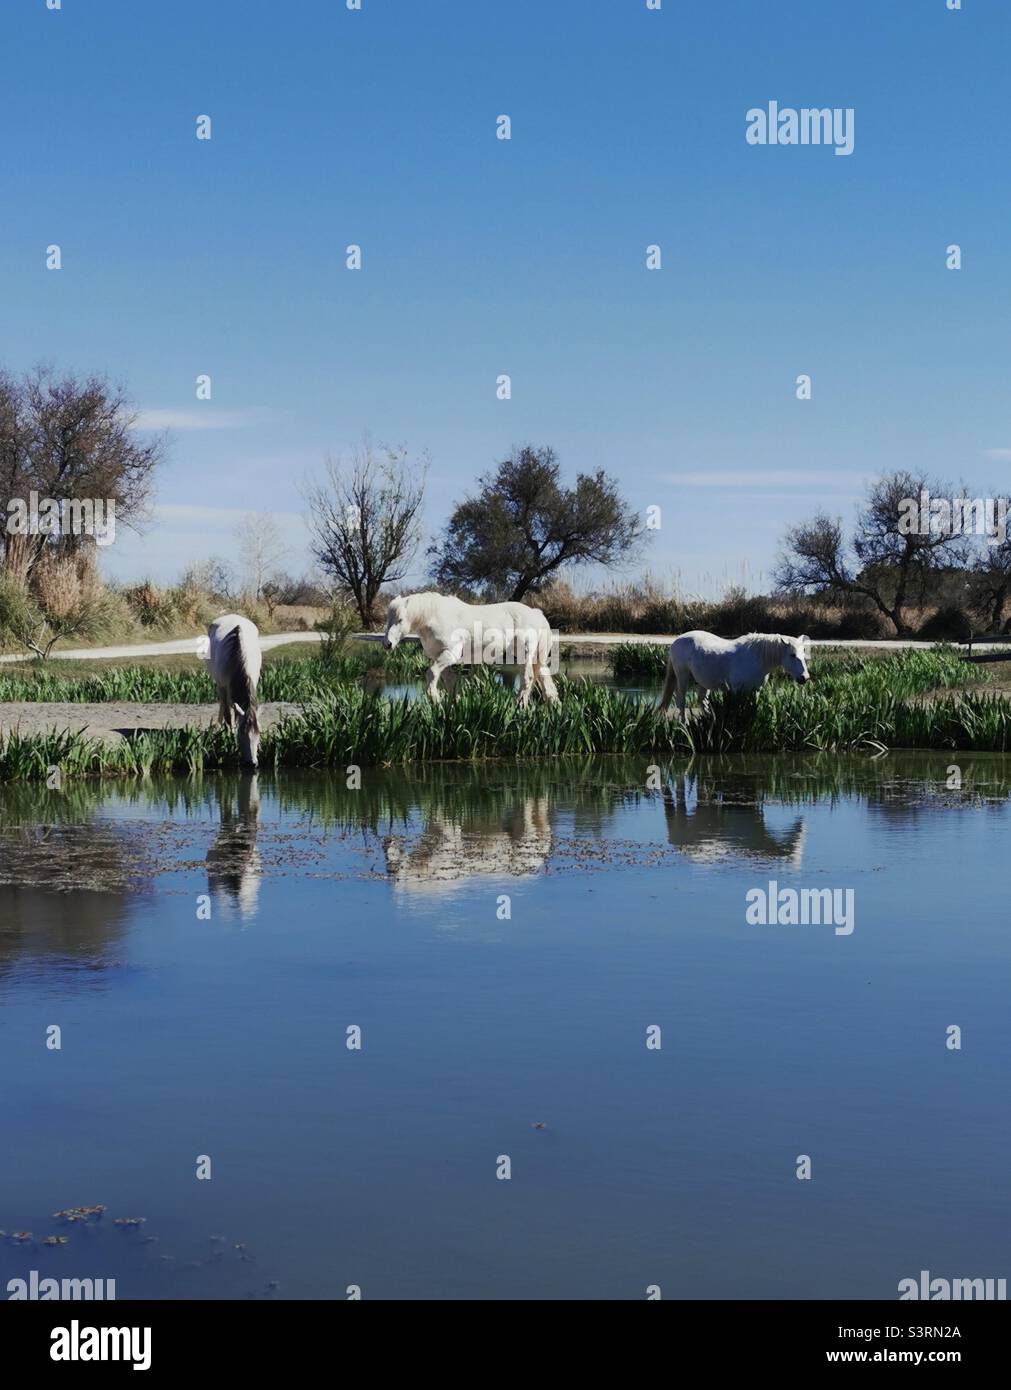 white horses in Camargue by a lake Stock Photo